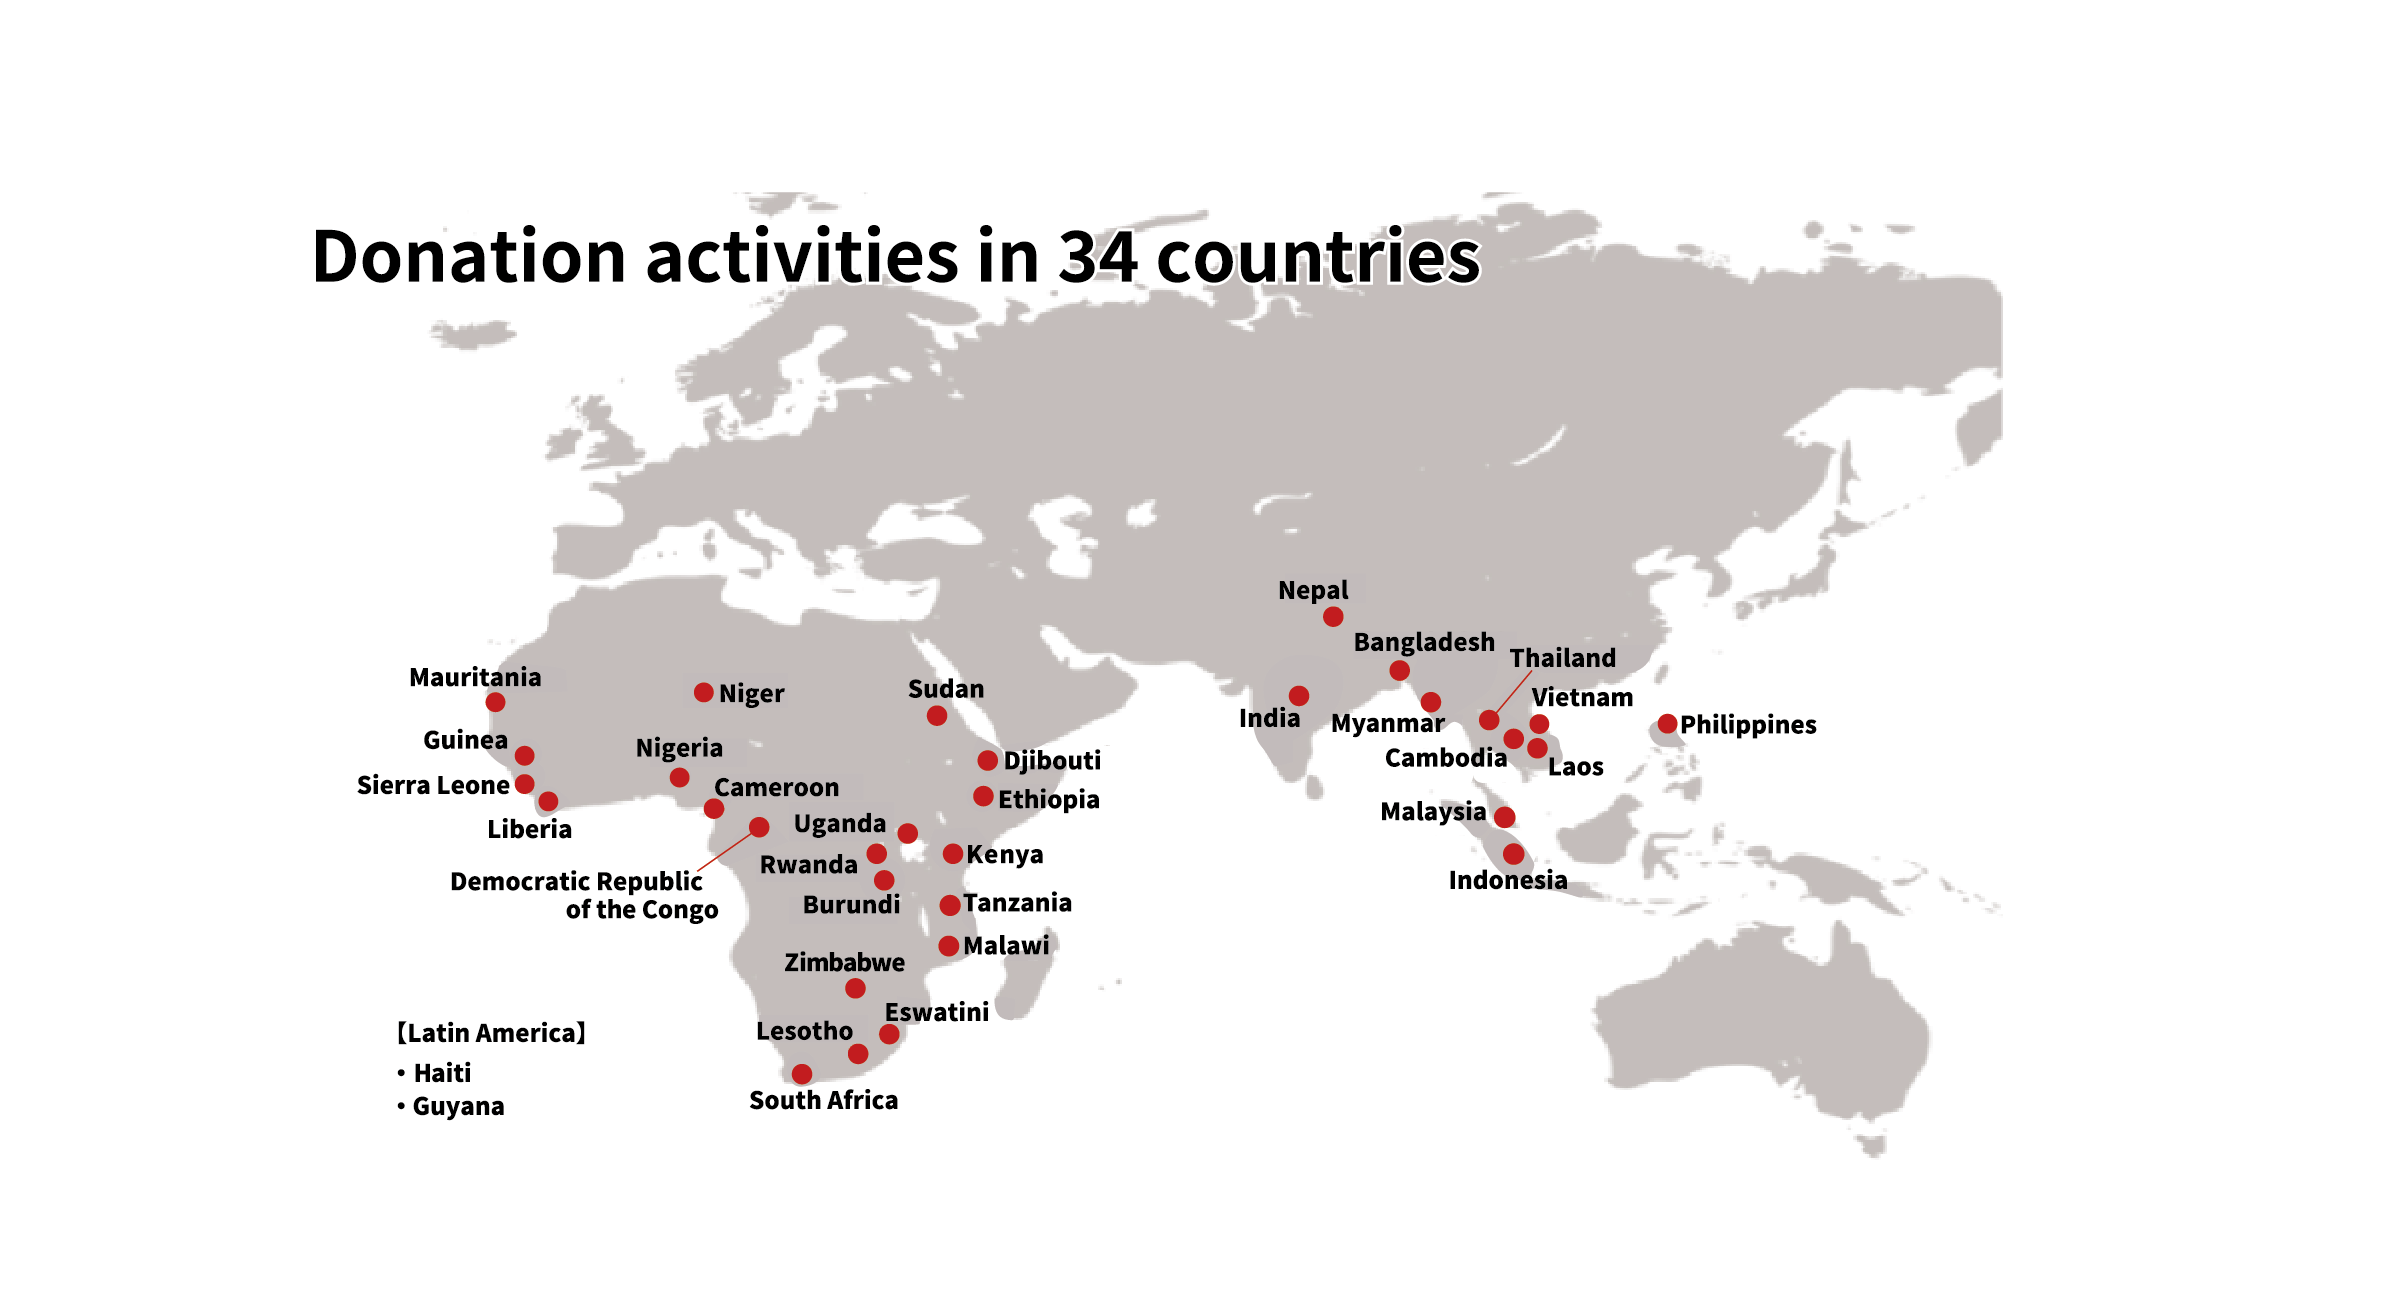 Donation activities in 34 countries